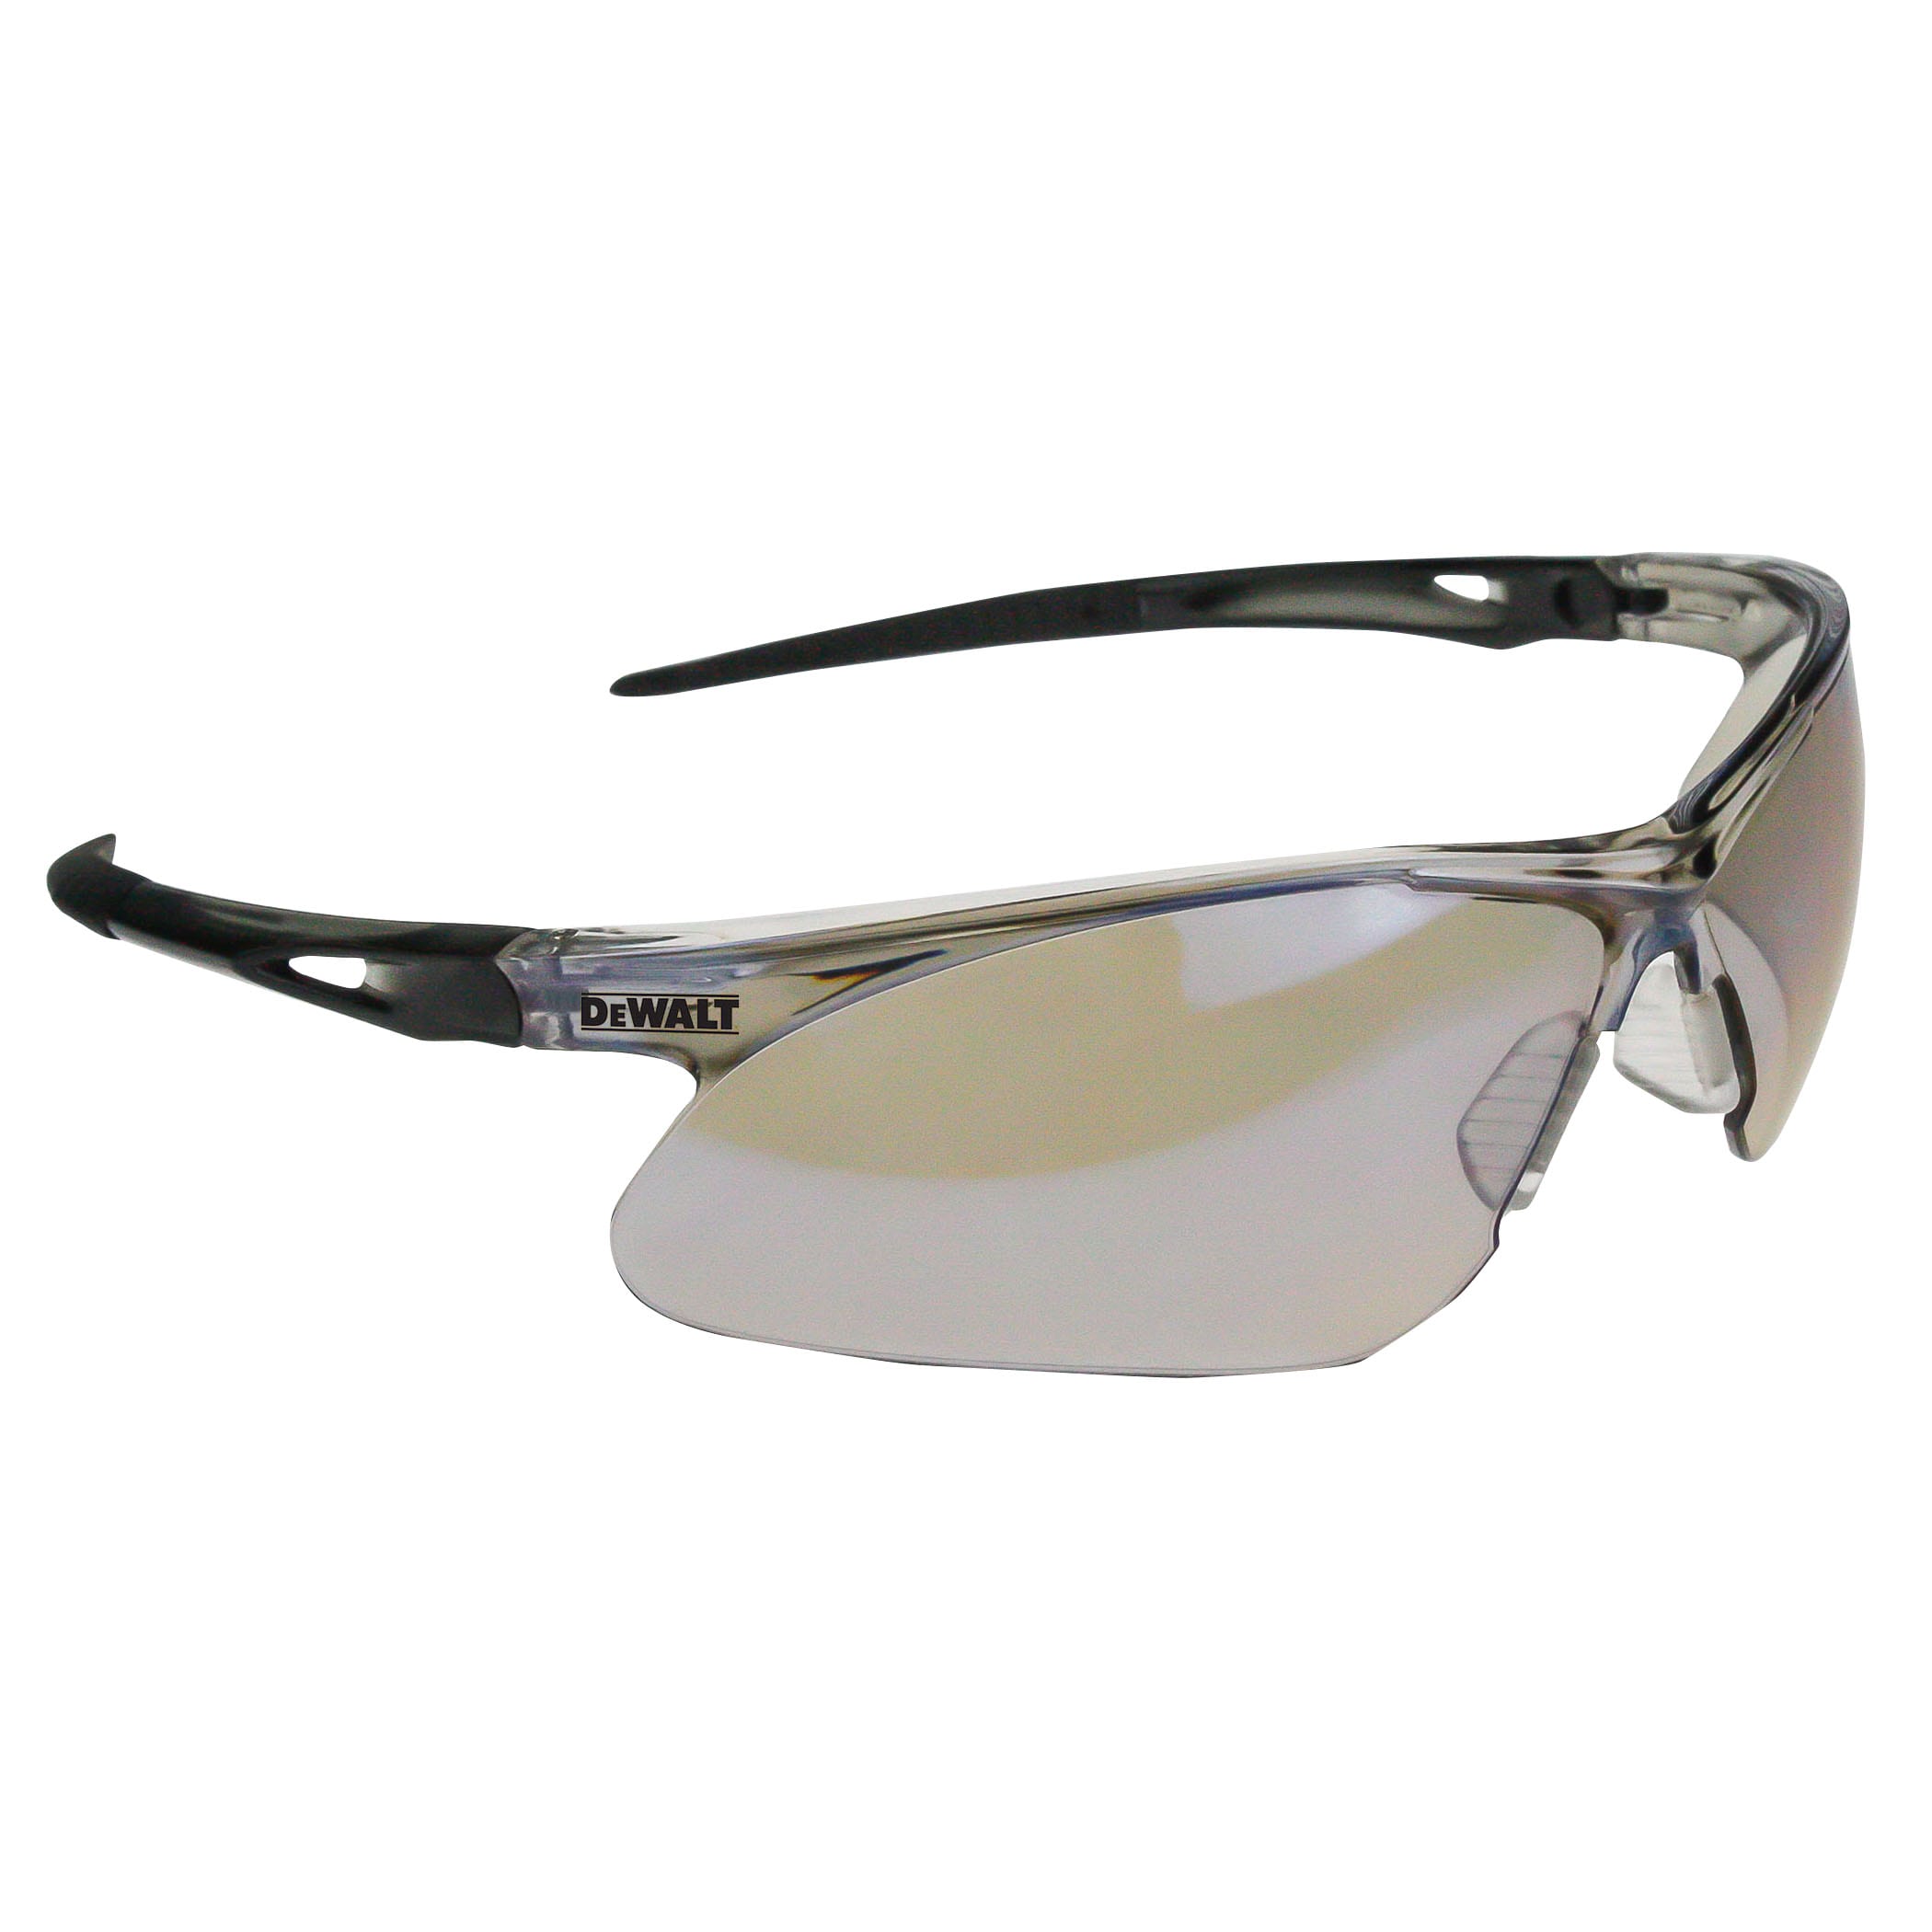 Crossfire Infinity Pearl Pink Frame Dark Smoke Lens Safety Glasses 22528 -  Box of 12